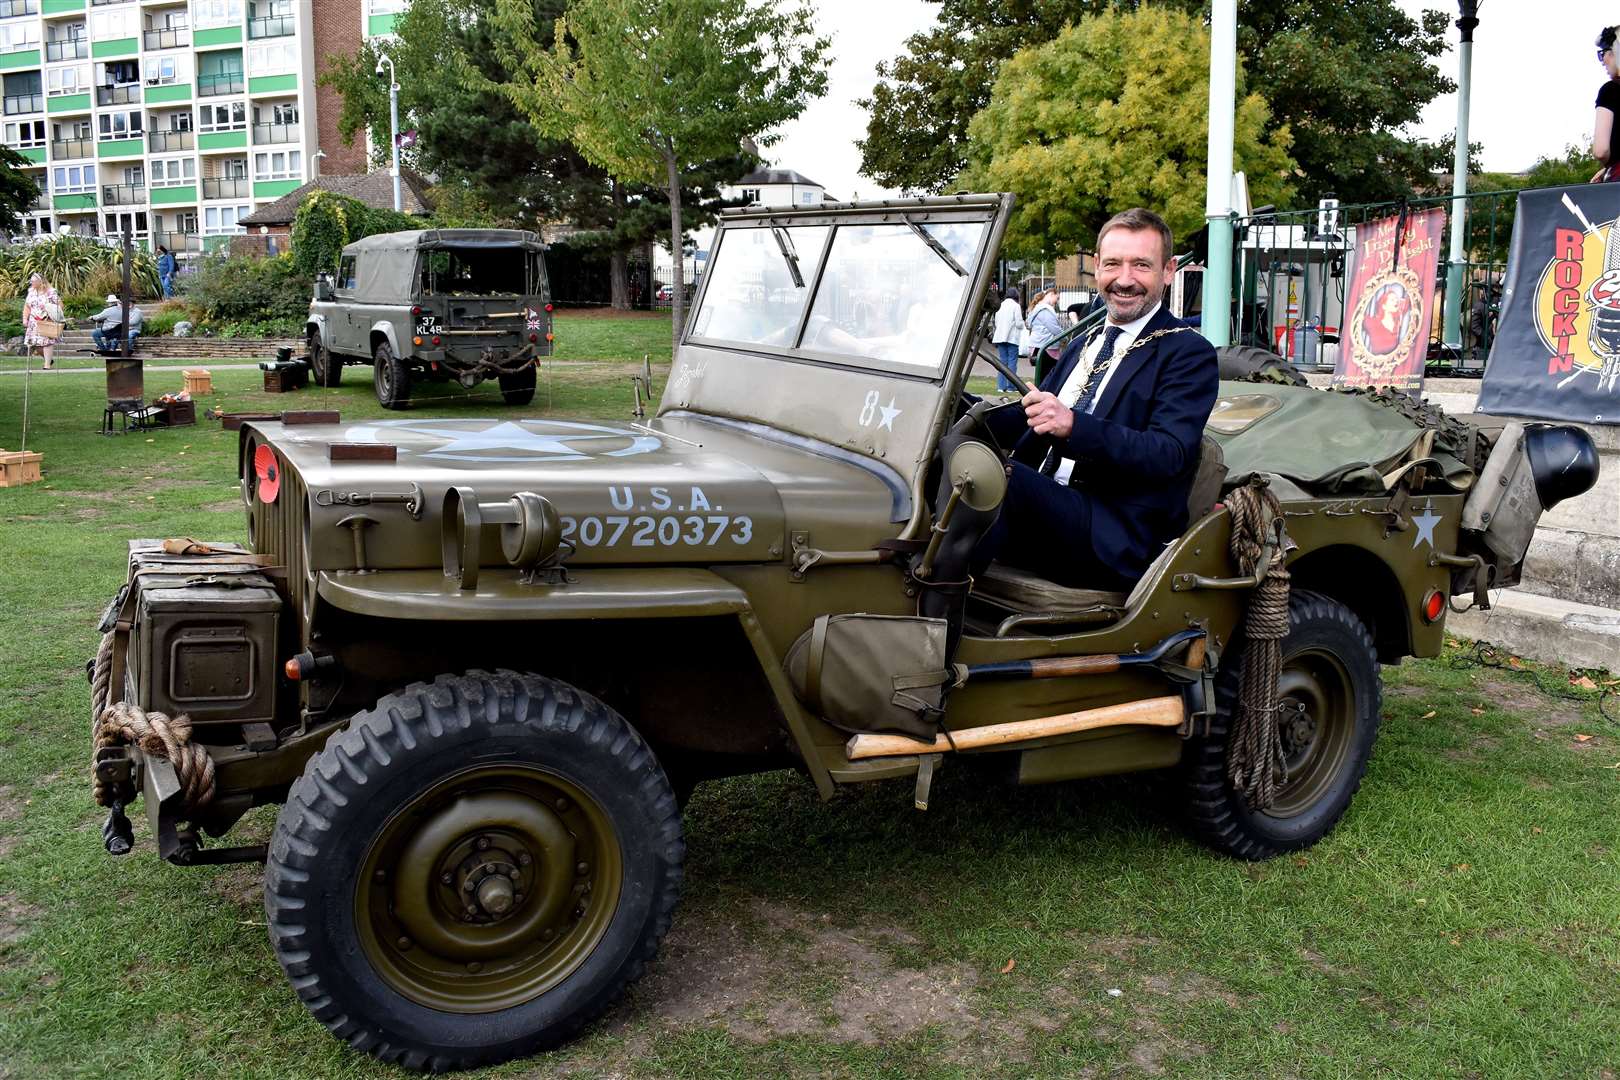 Cllr Peter Scollard got involved looking around the old vehicles. Picture: Jason Arthur